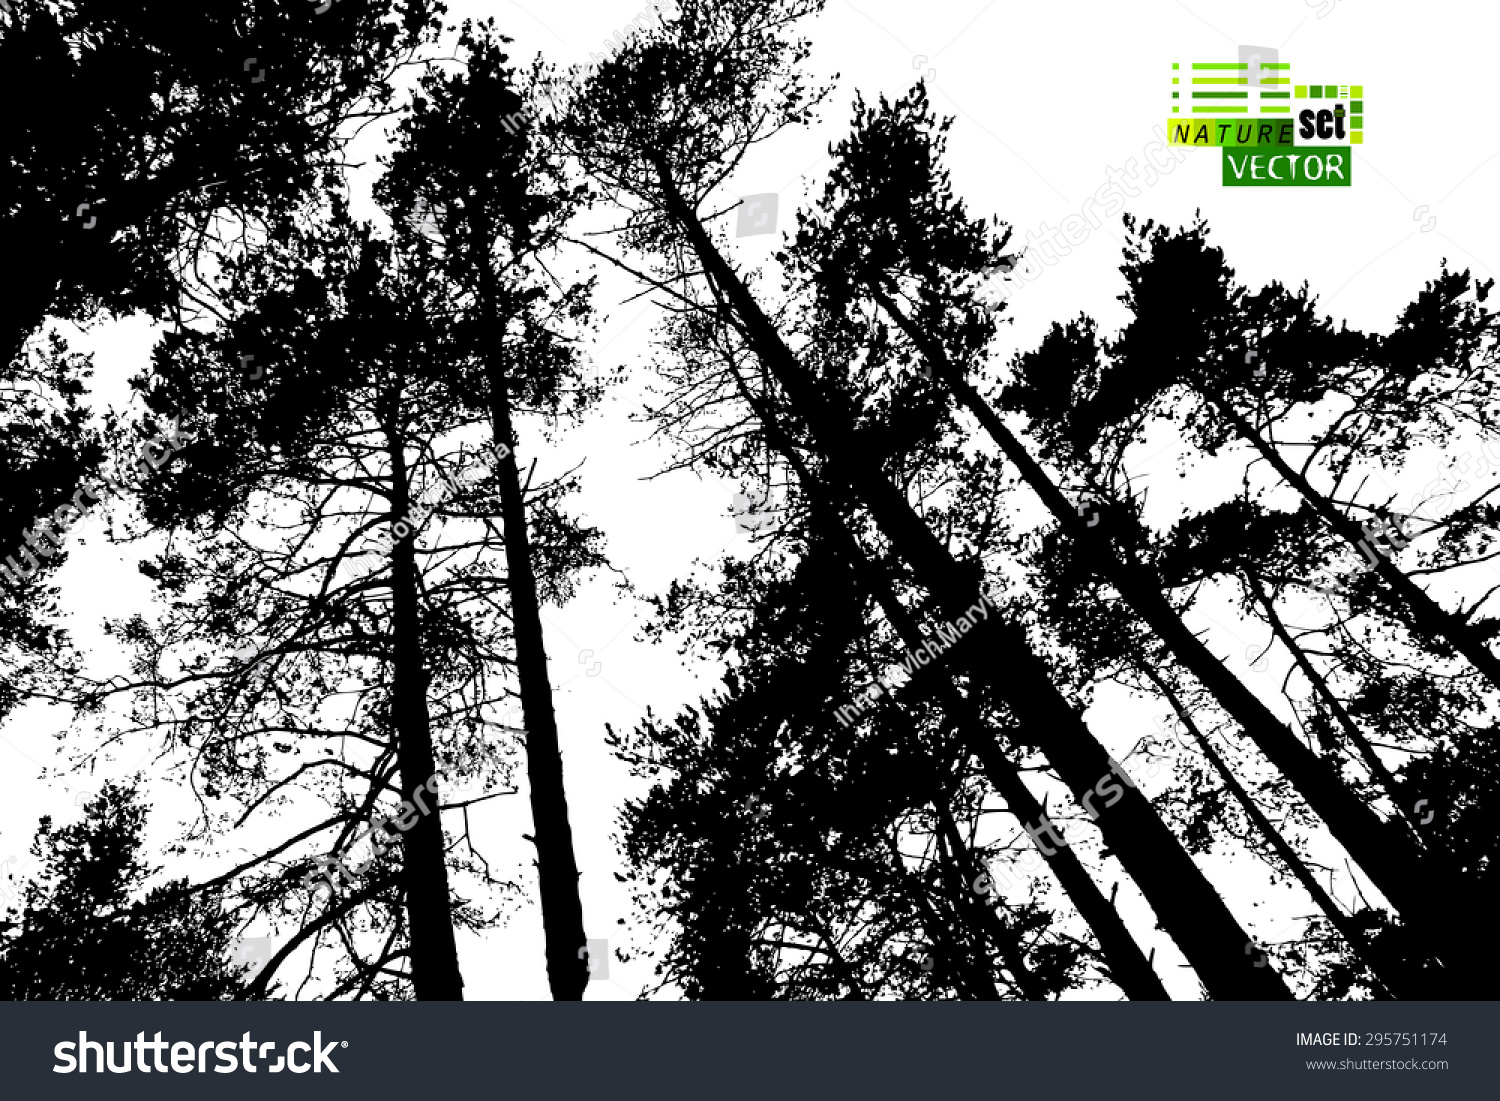 Forest Tree Silhouettes. Vector - 295751174 : Shutterstock